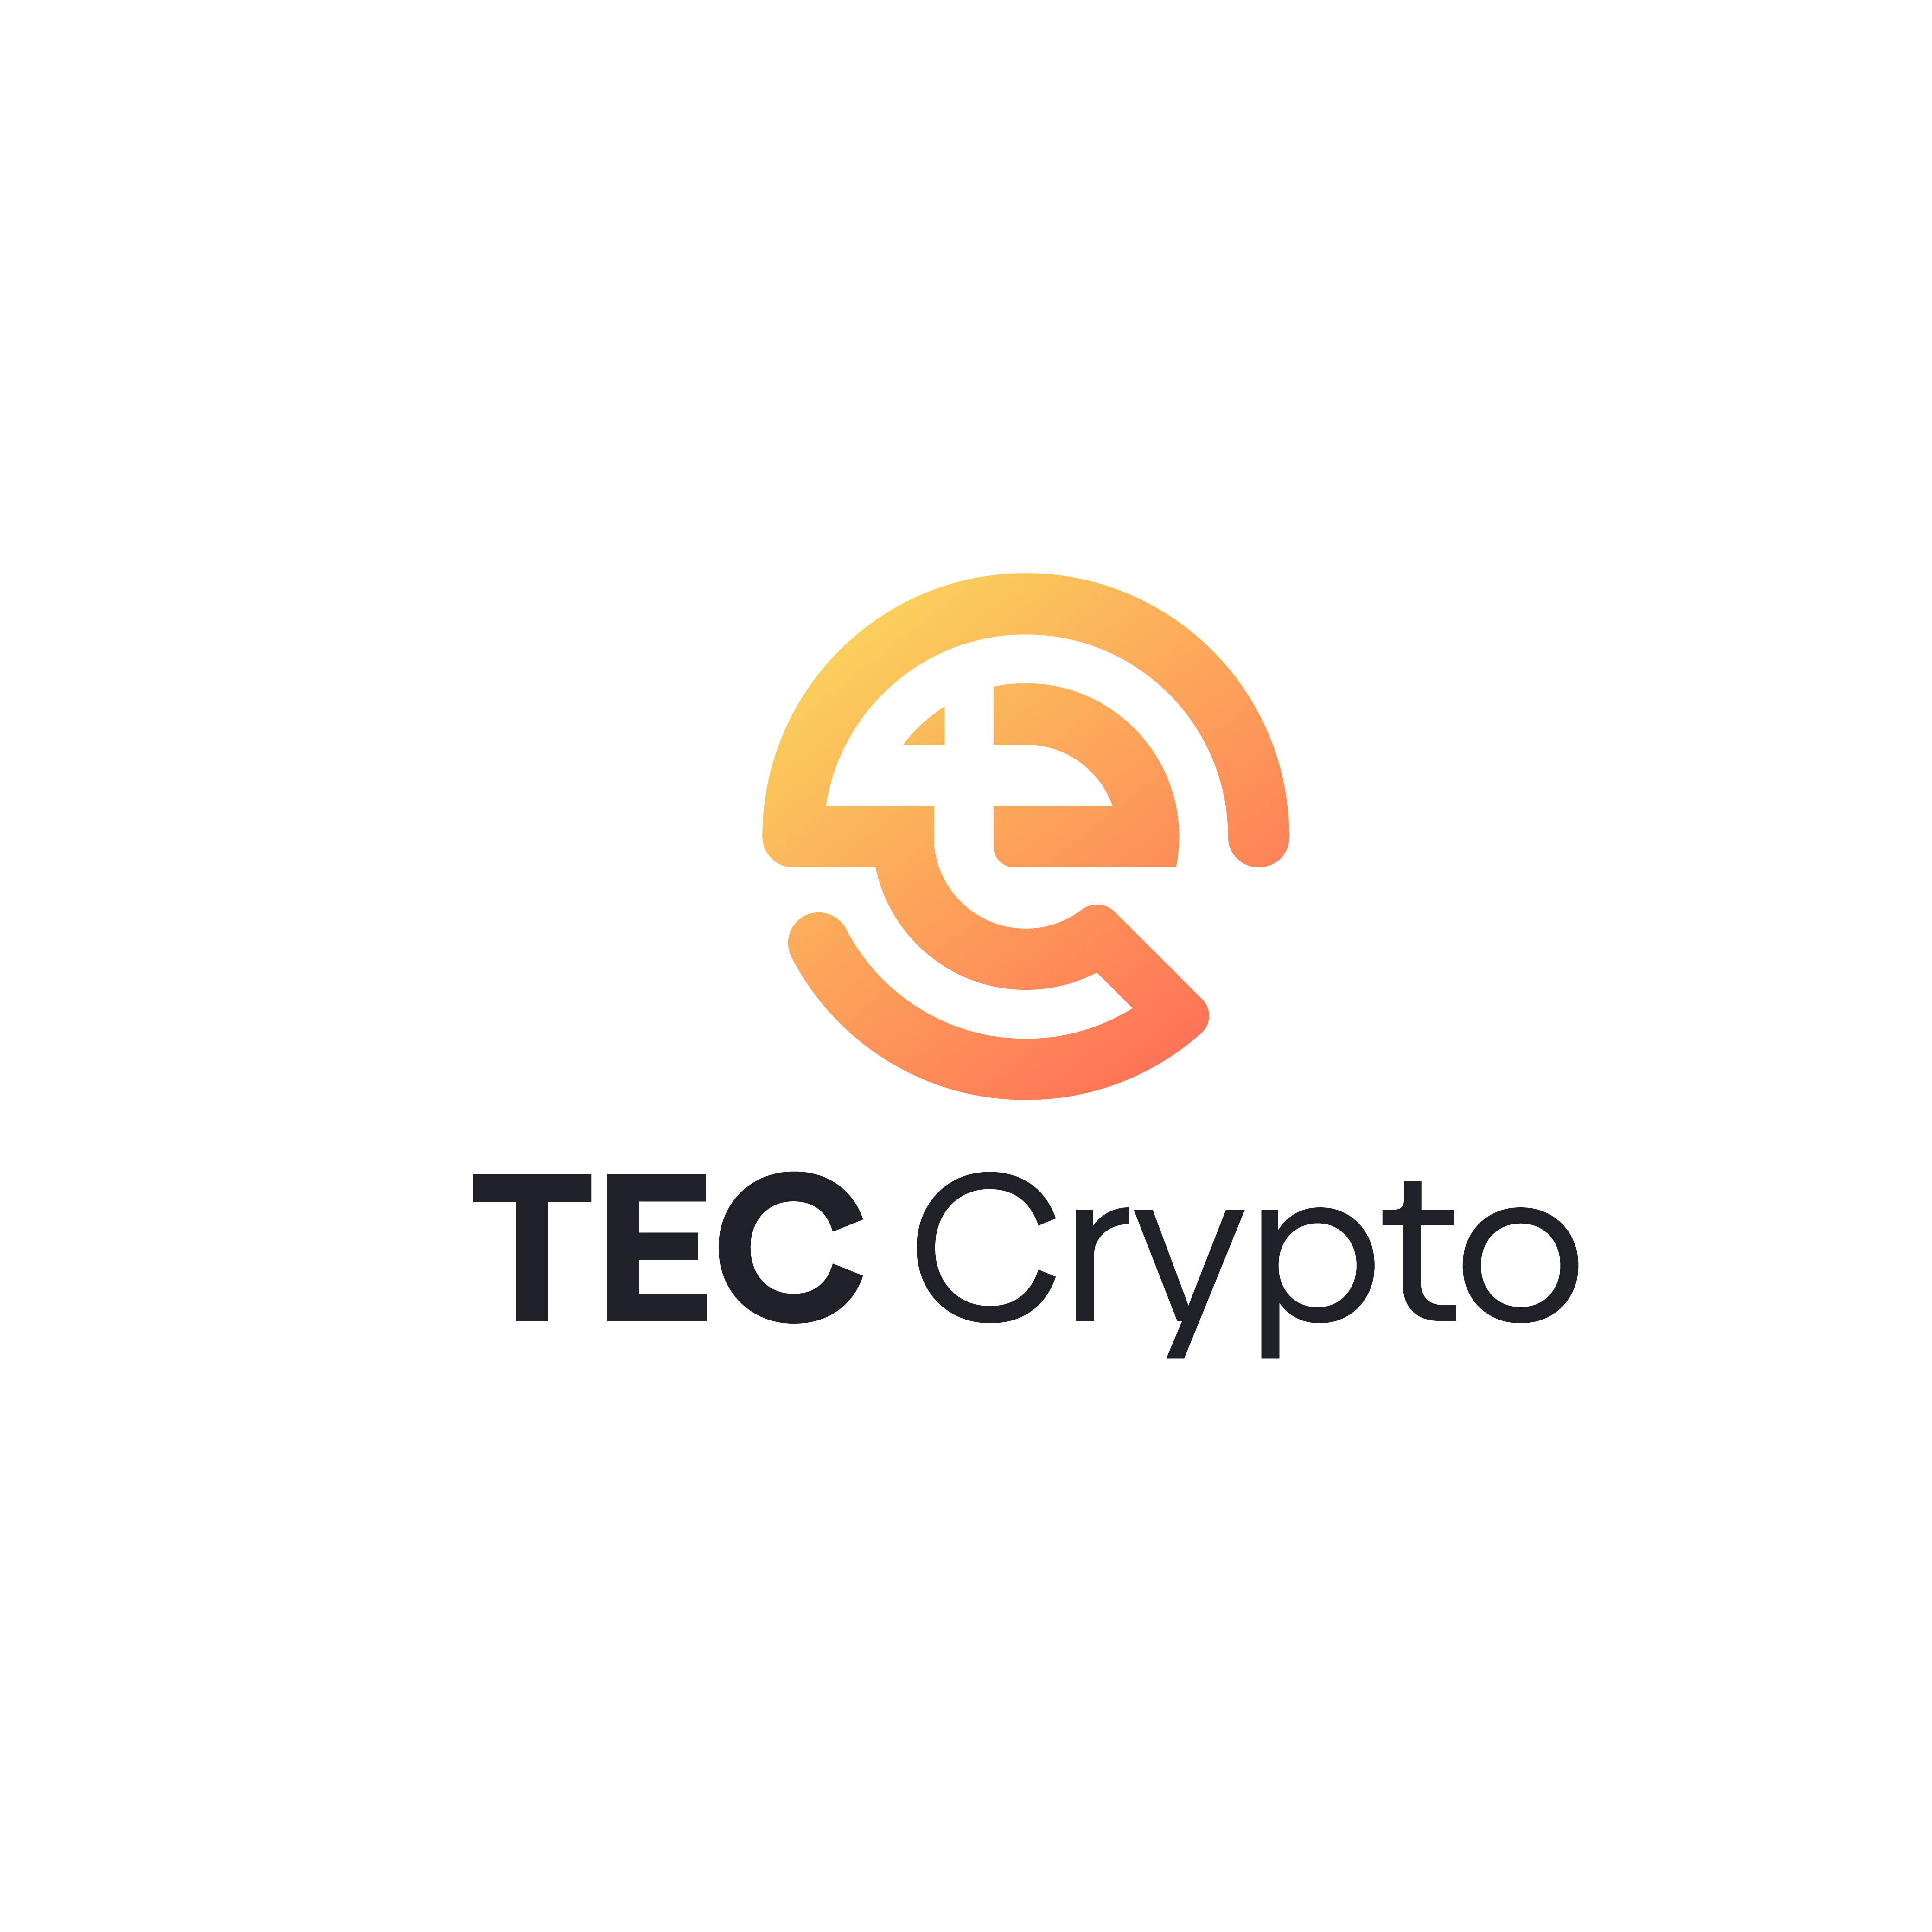 Taking Cloud Mining to New Heights: TecCrypto Uses New Technology